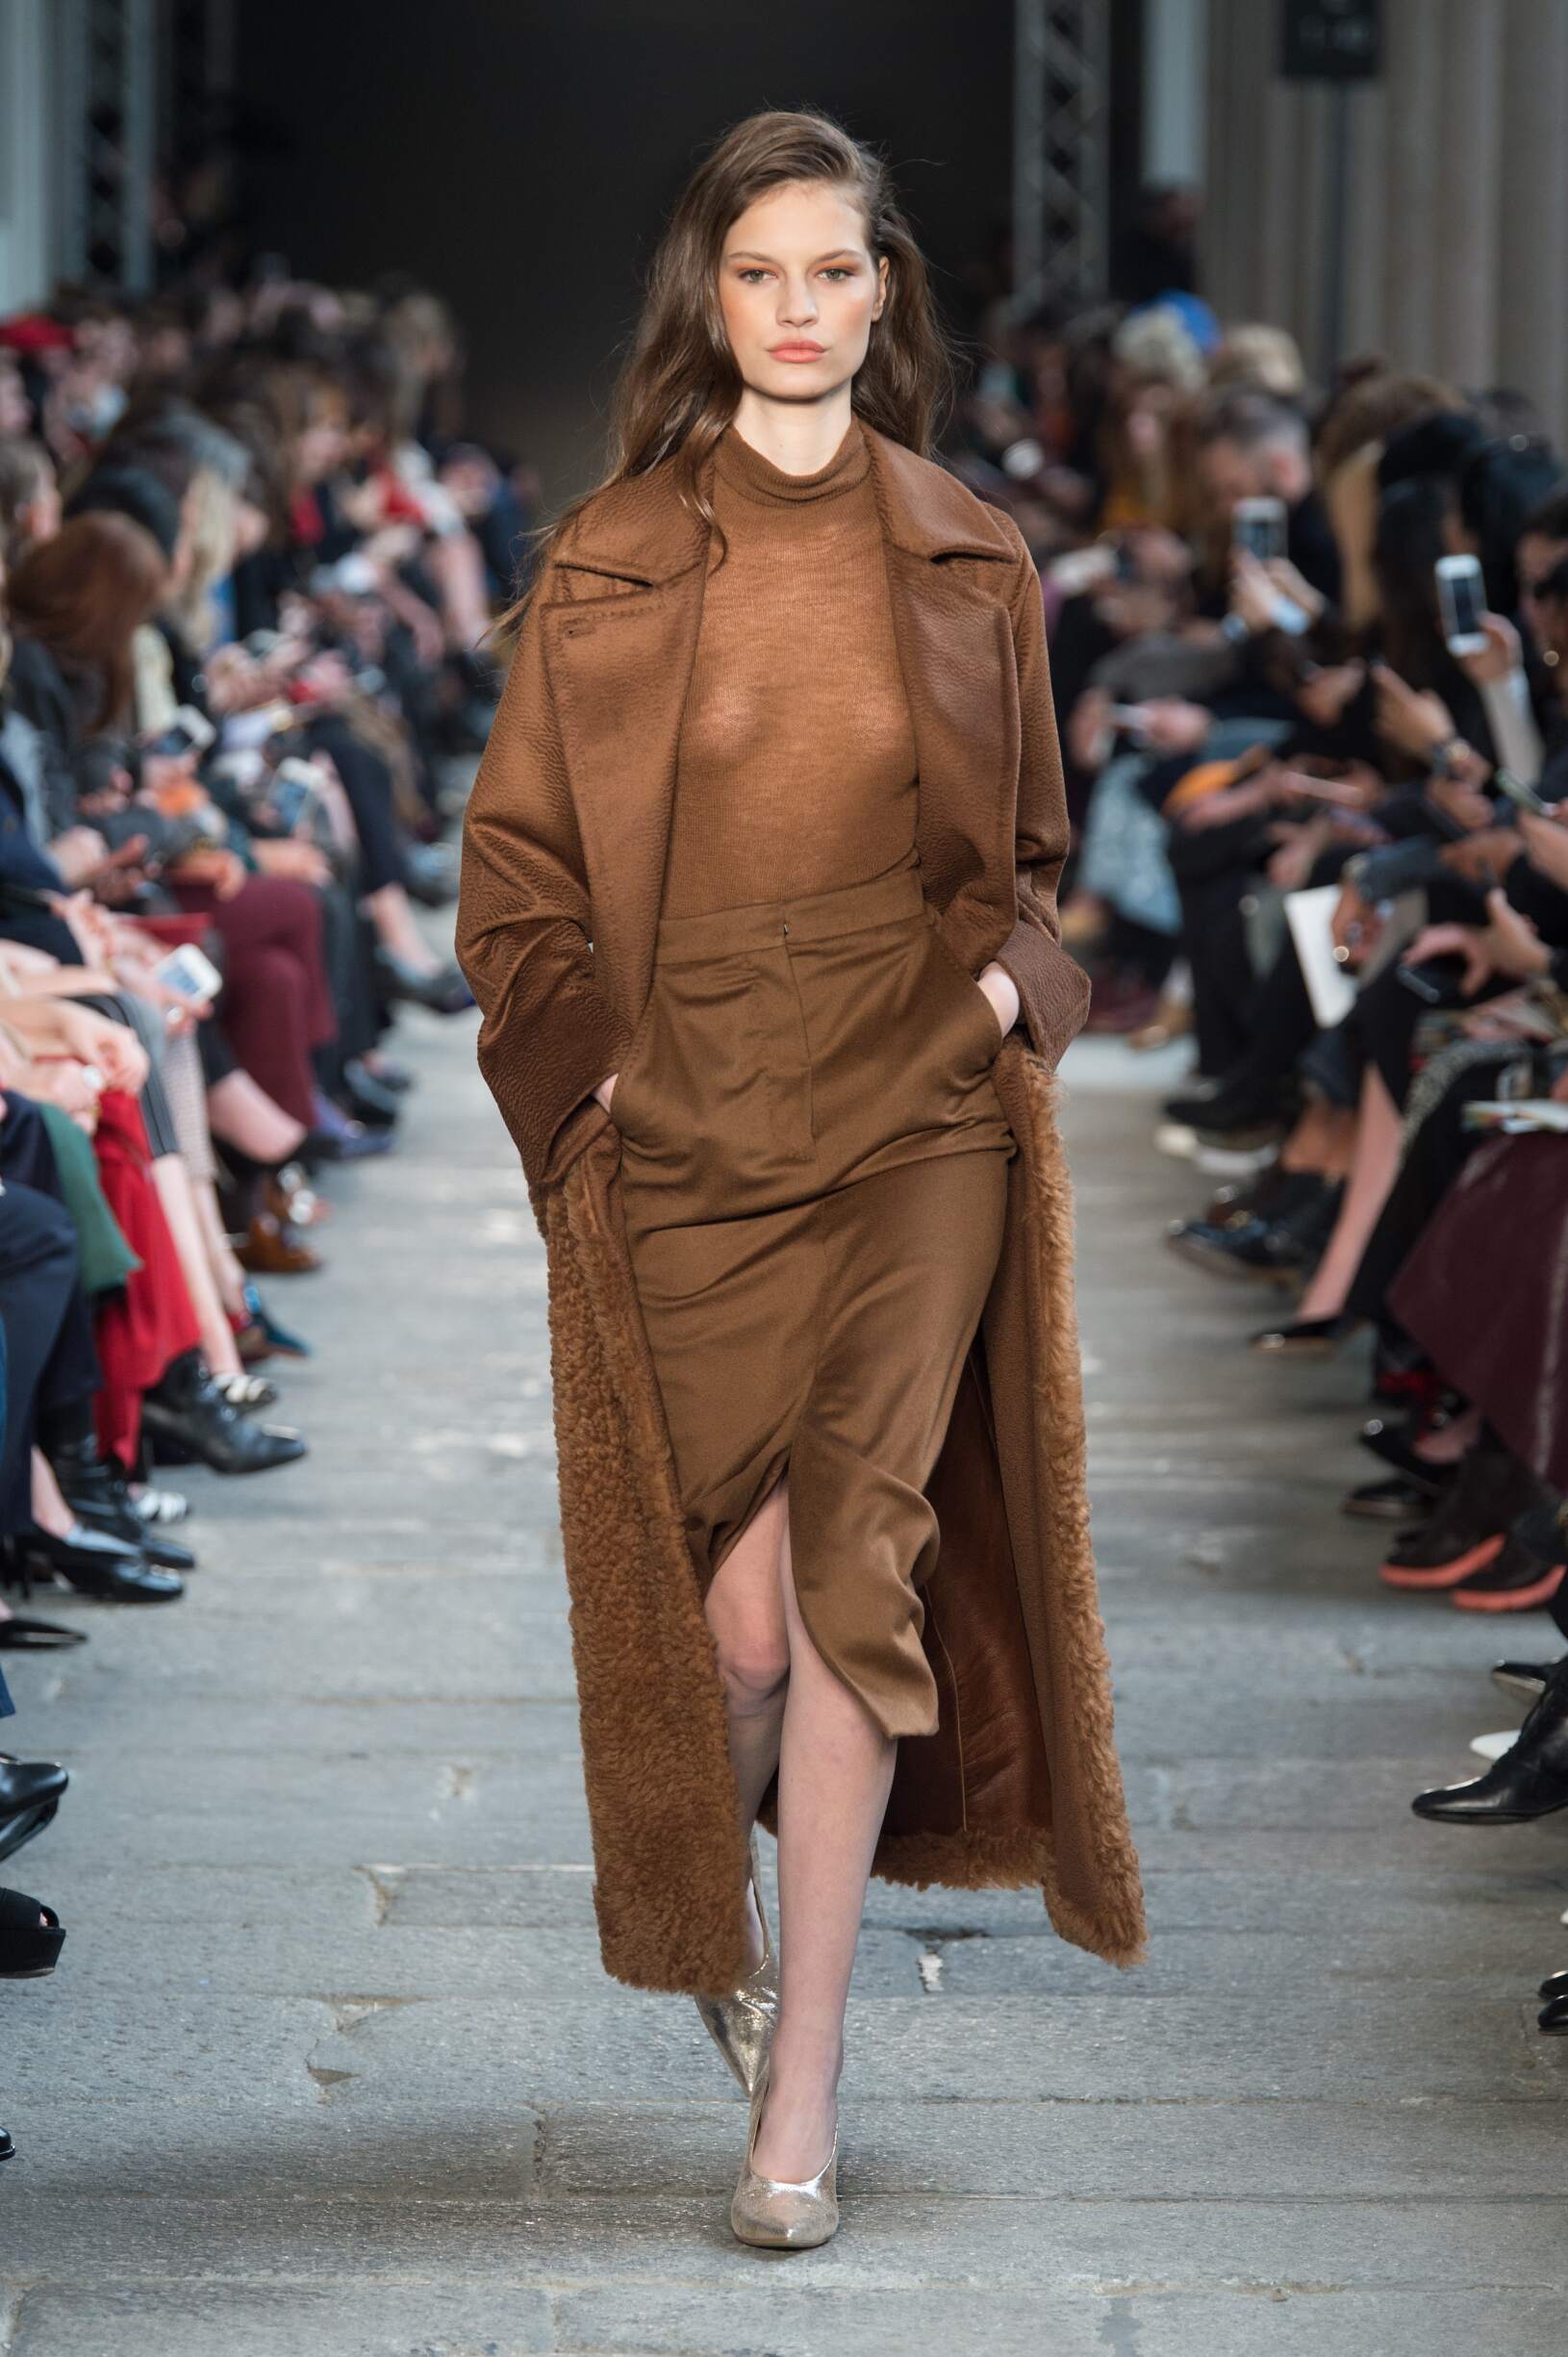 MAX MARA FALL WINTER 2017-18 WOMEN'S COLLECTION | The Skinny Beep